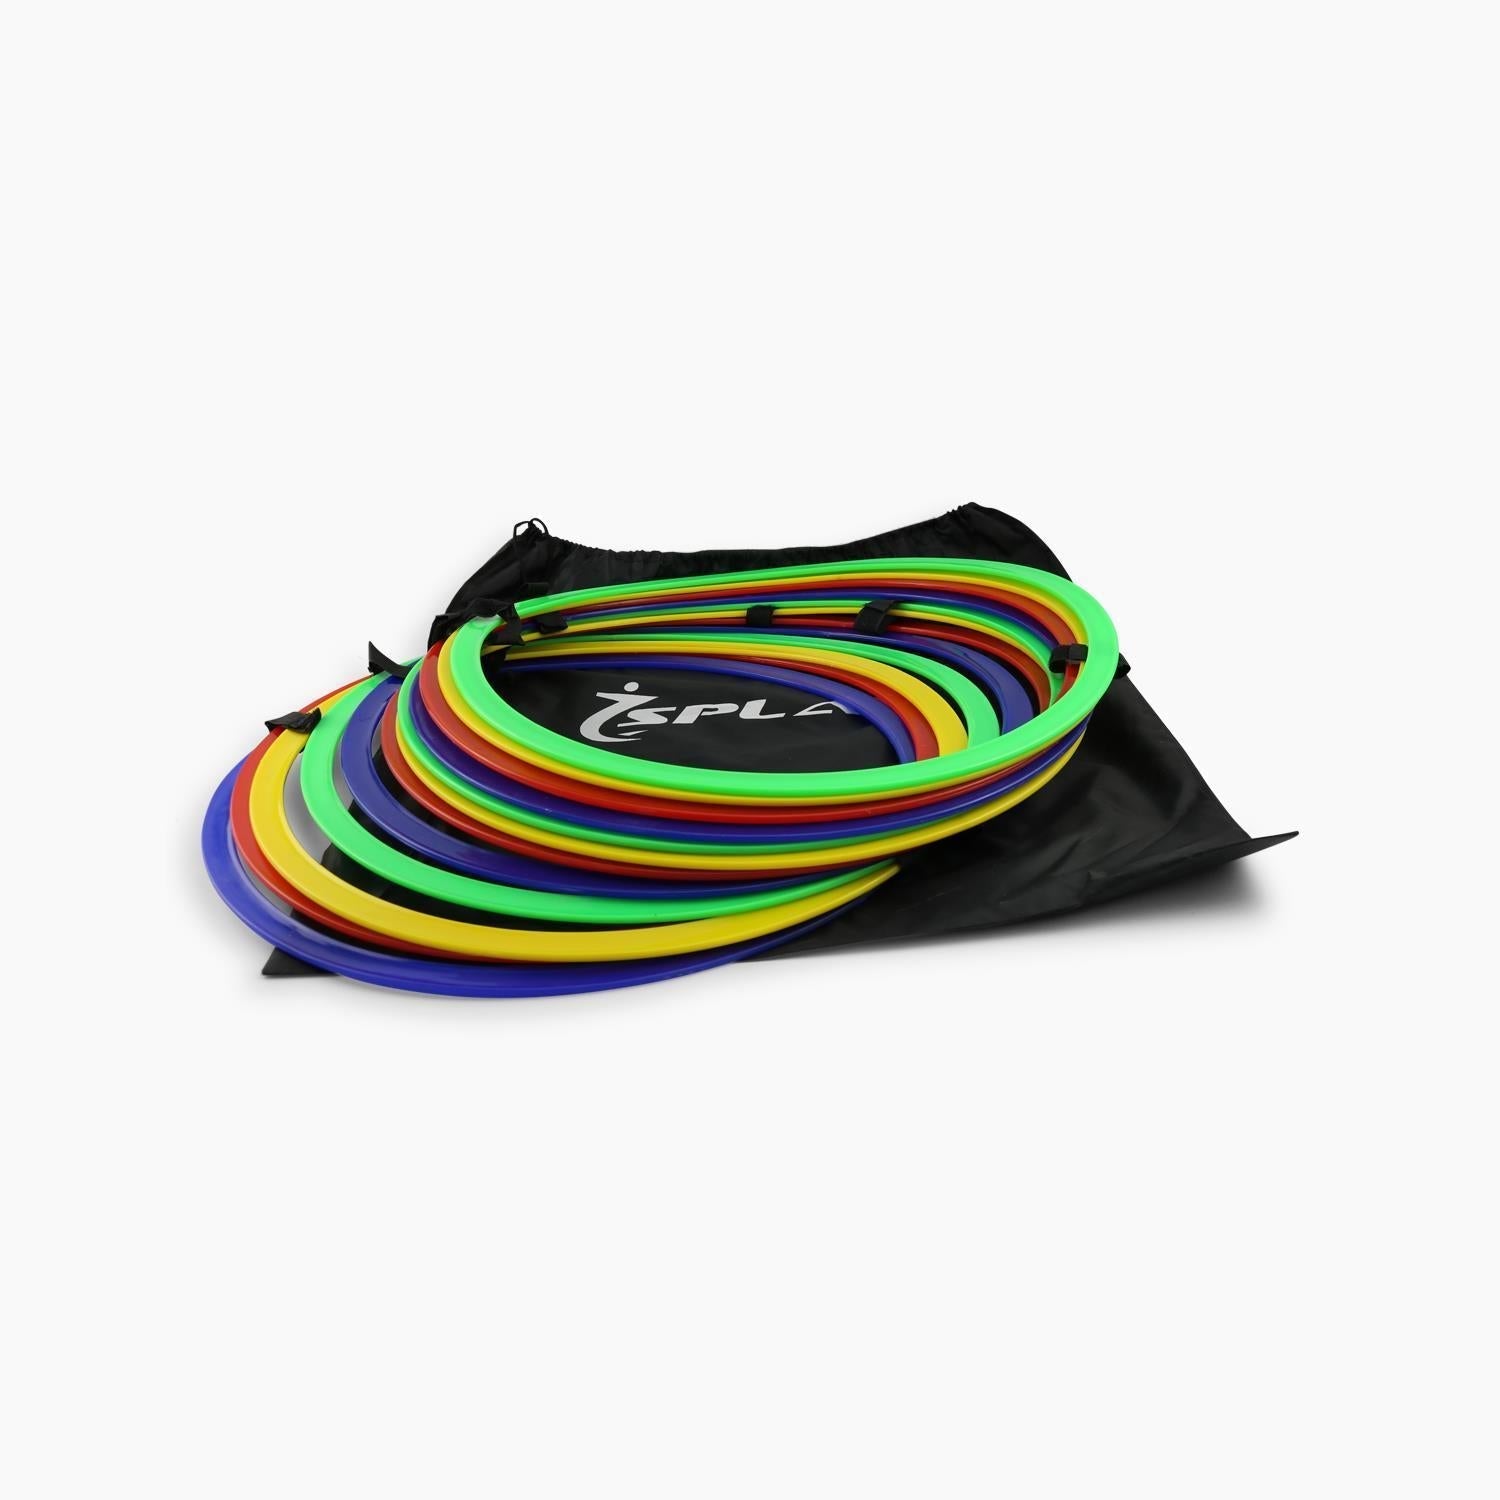 Buy Speed rings Flat with Velcro -Set of 12-Splay-Mix-18 Inch-Splay UK Online